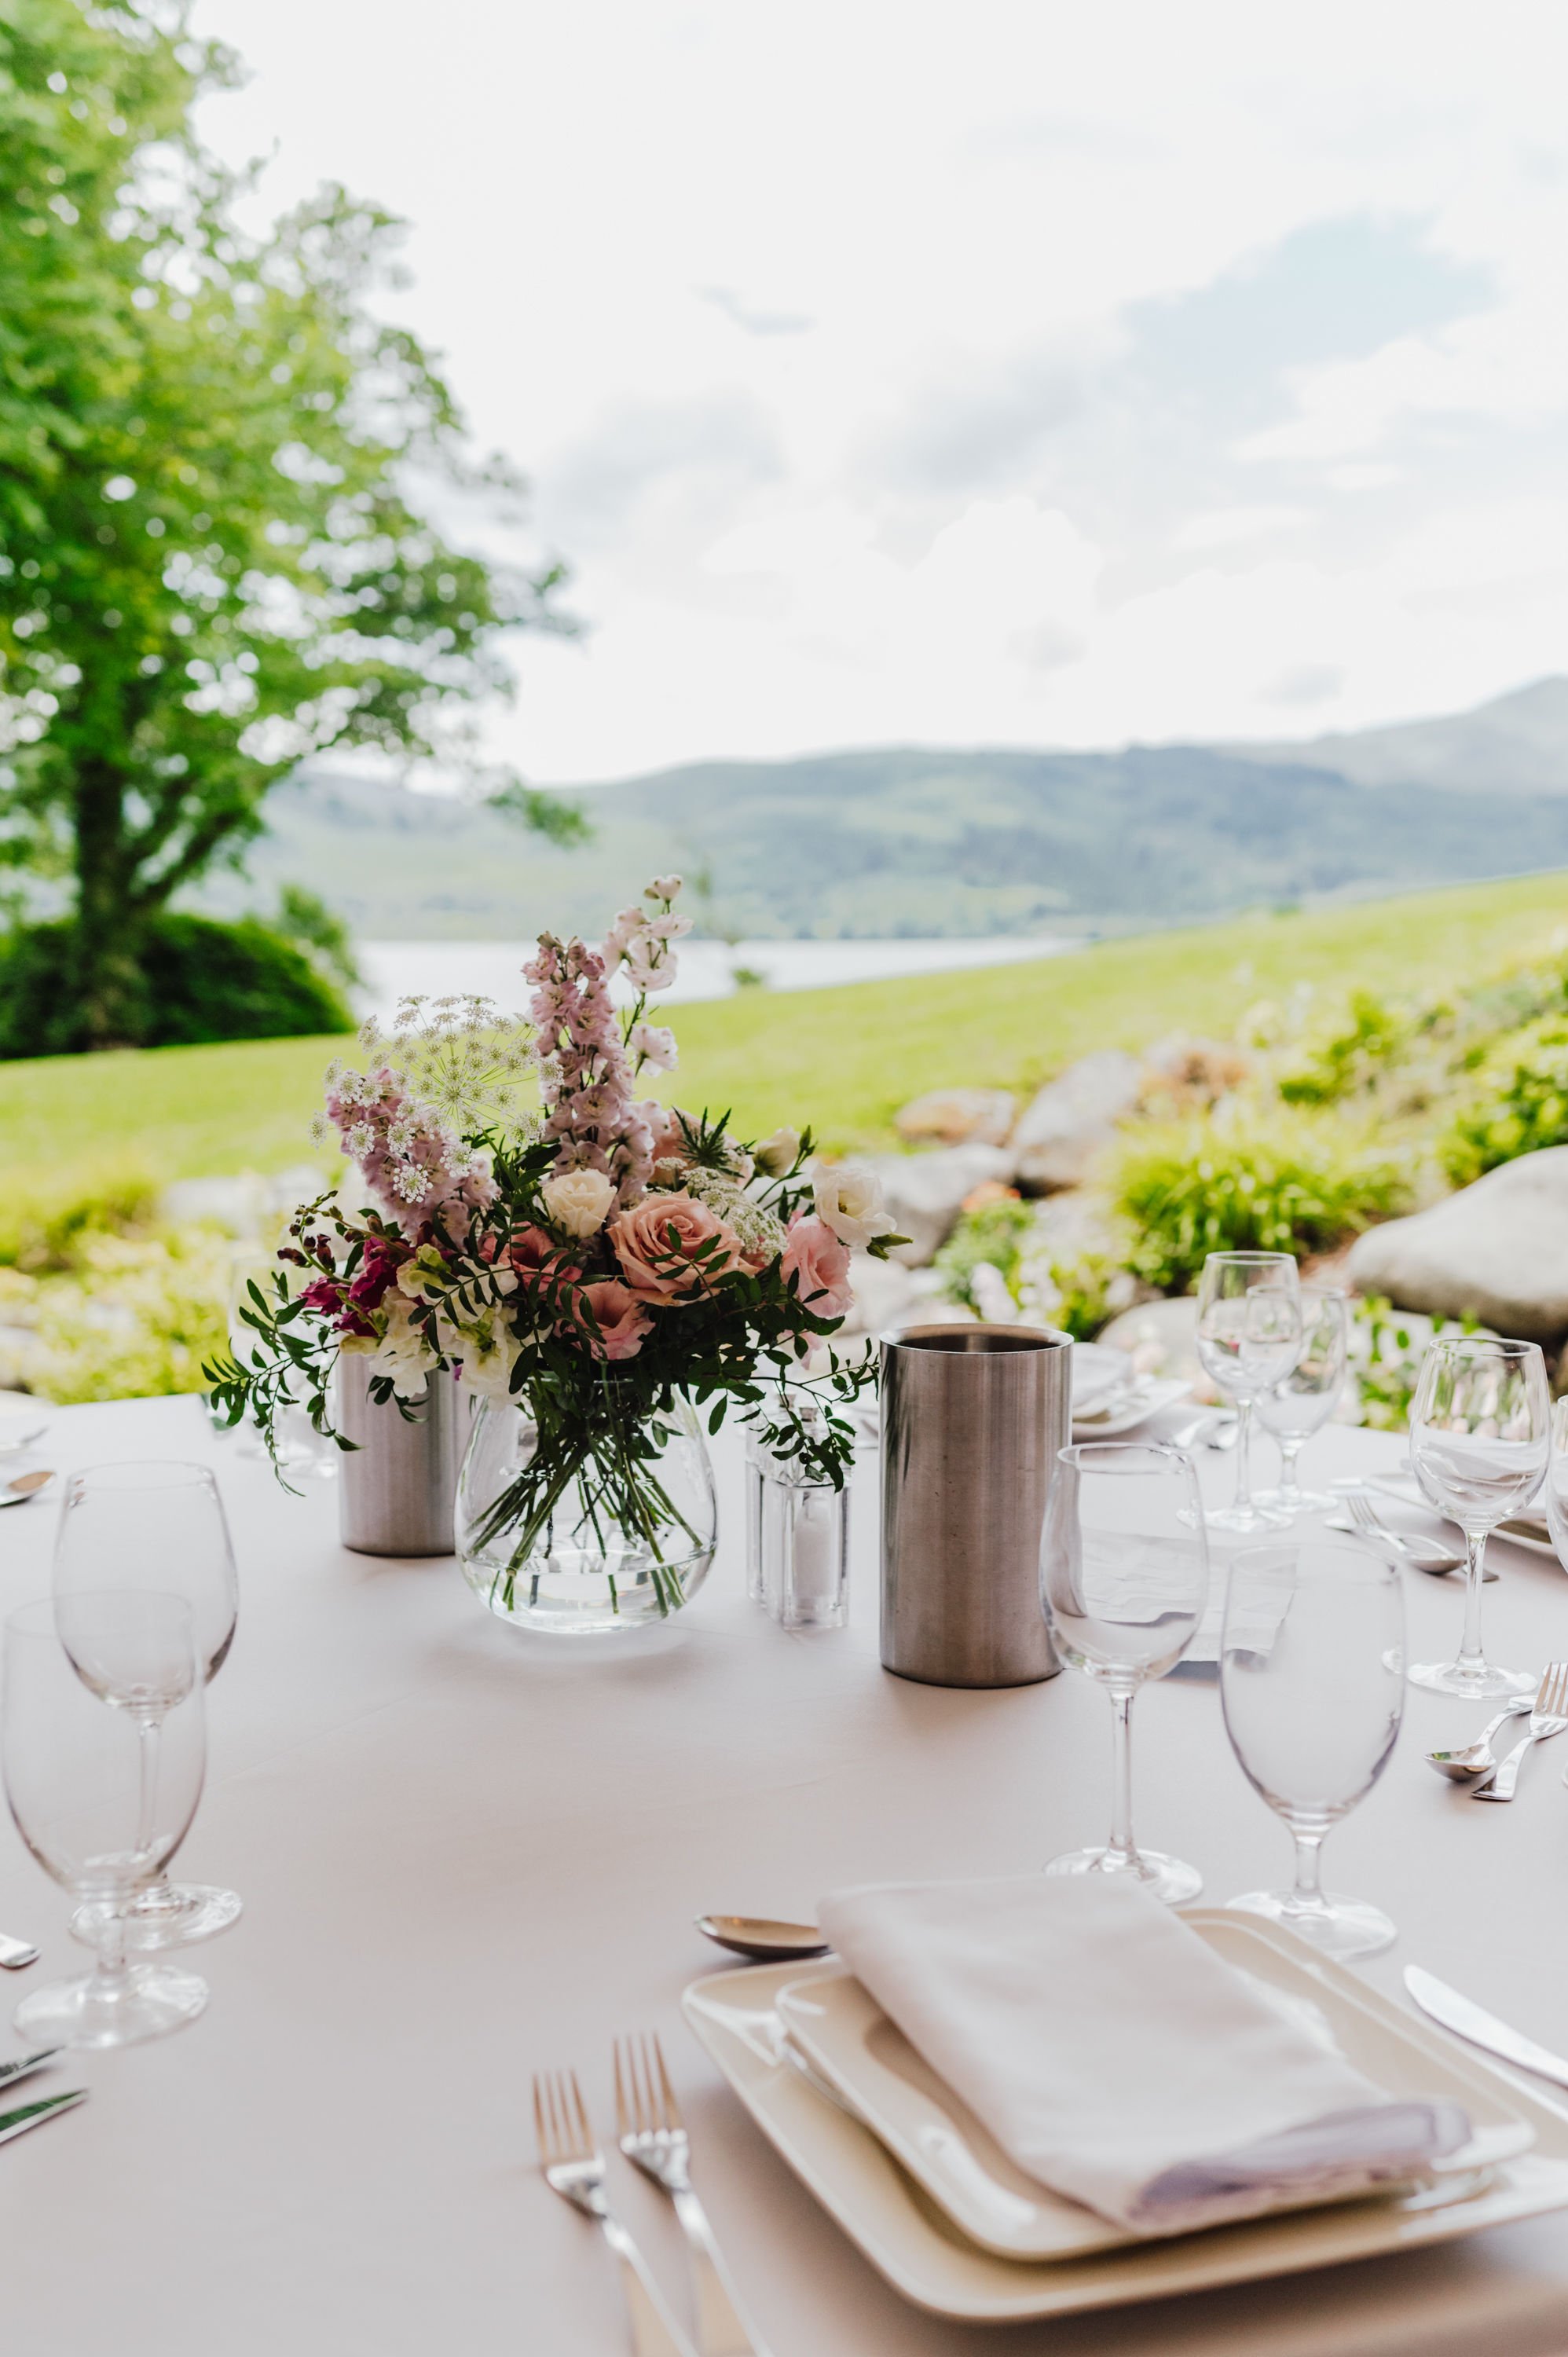  The carefully thought out wedding florals tonally reflect the outside scenery.  A beautiful, natural looking floral centrepiece in muted pink florals at various heights and green foliage, adds personality and interest to the tables which have been l